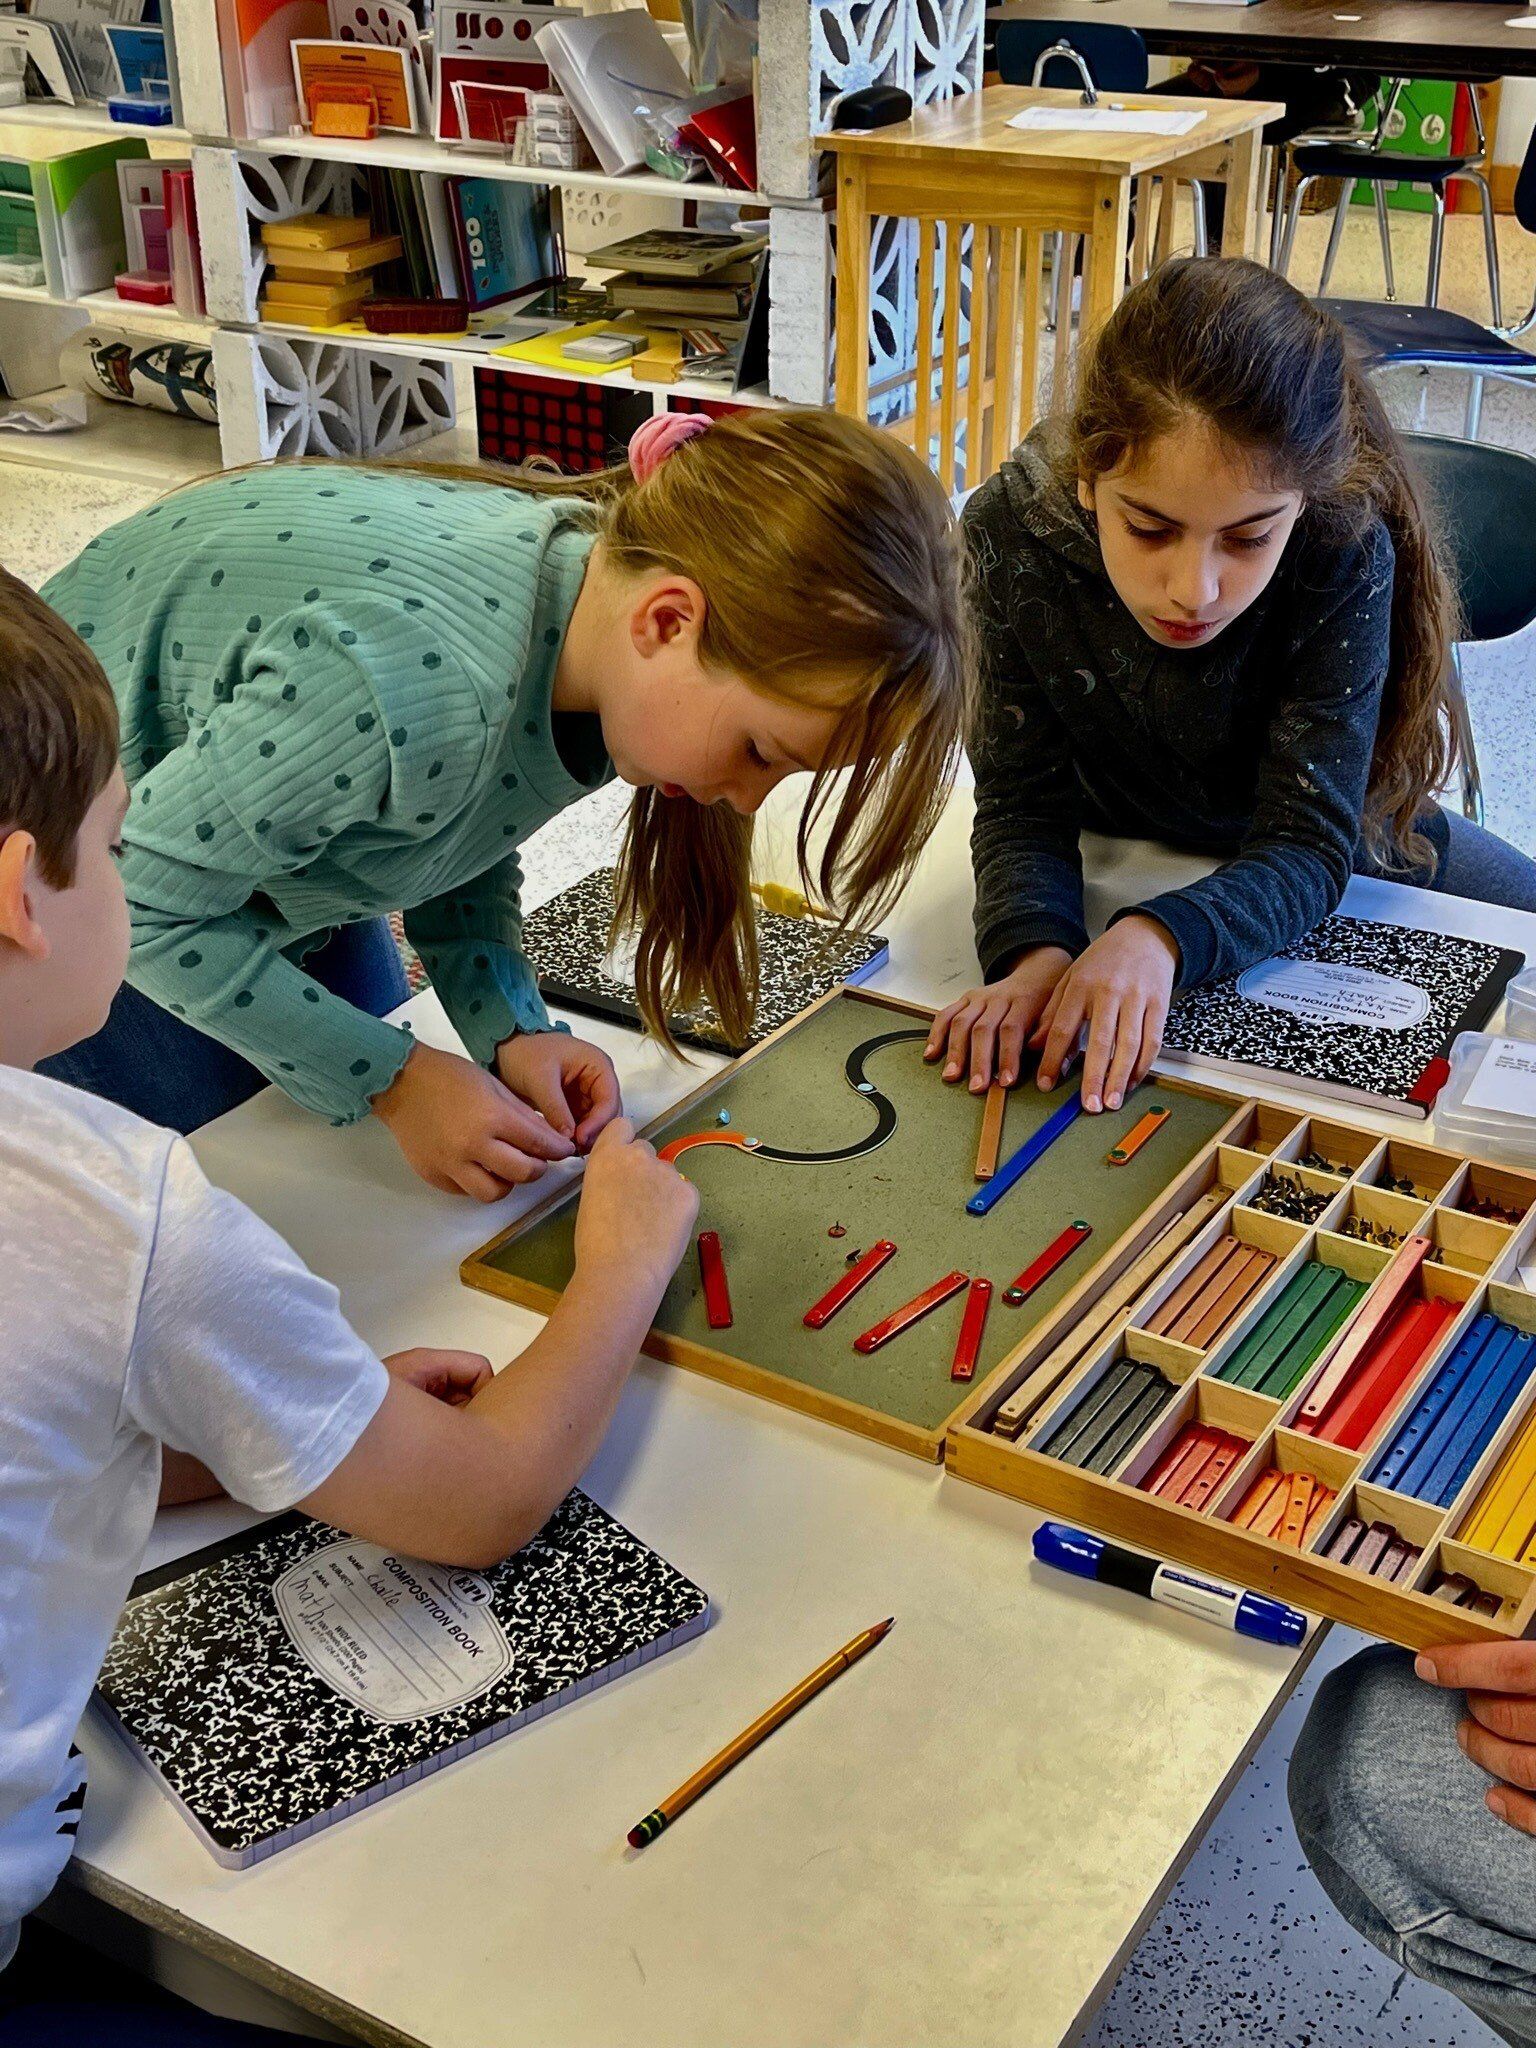 Montessori children working together in the classroom